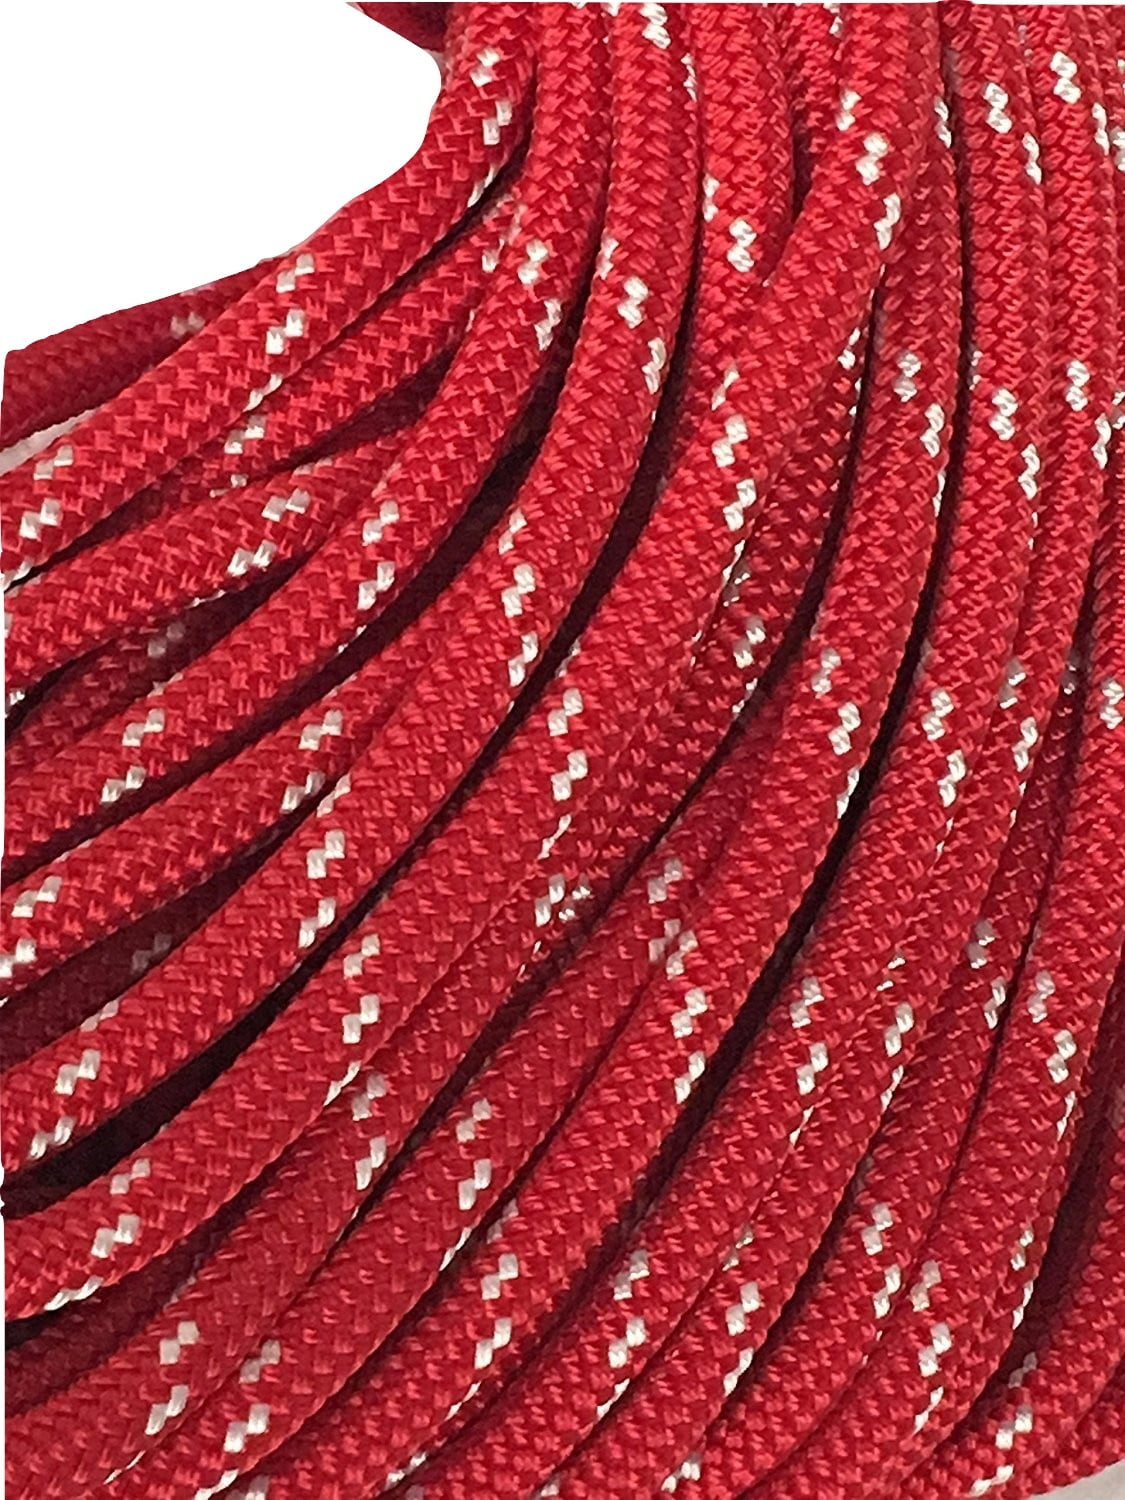 100FT Double Braid Polyester Rope 3/8 4800Lbs BREAKING STRENGTH 